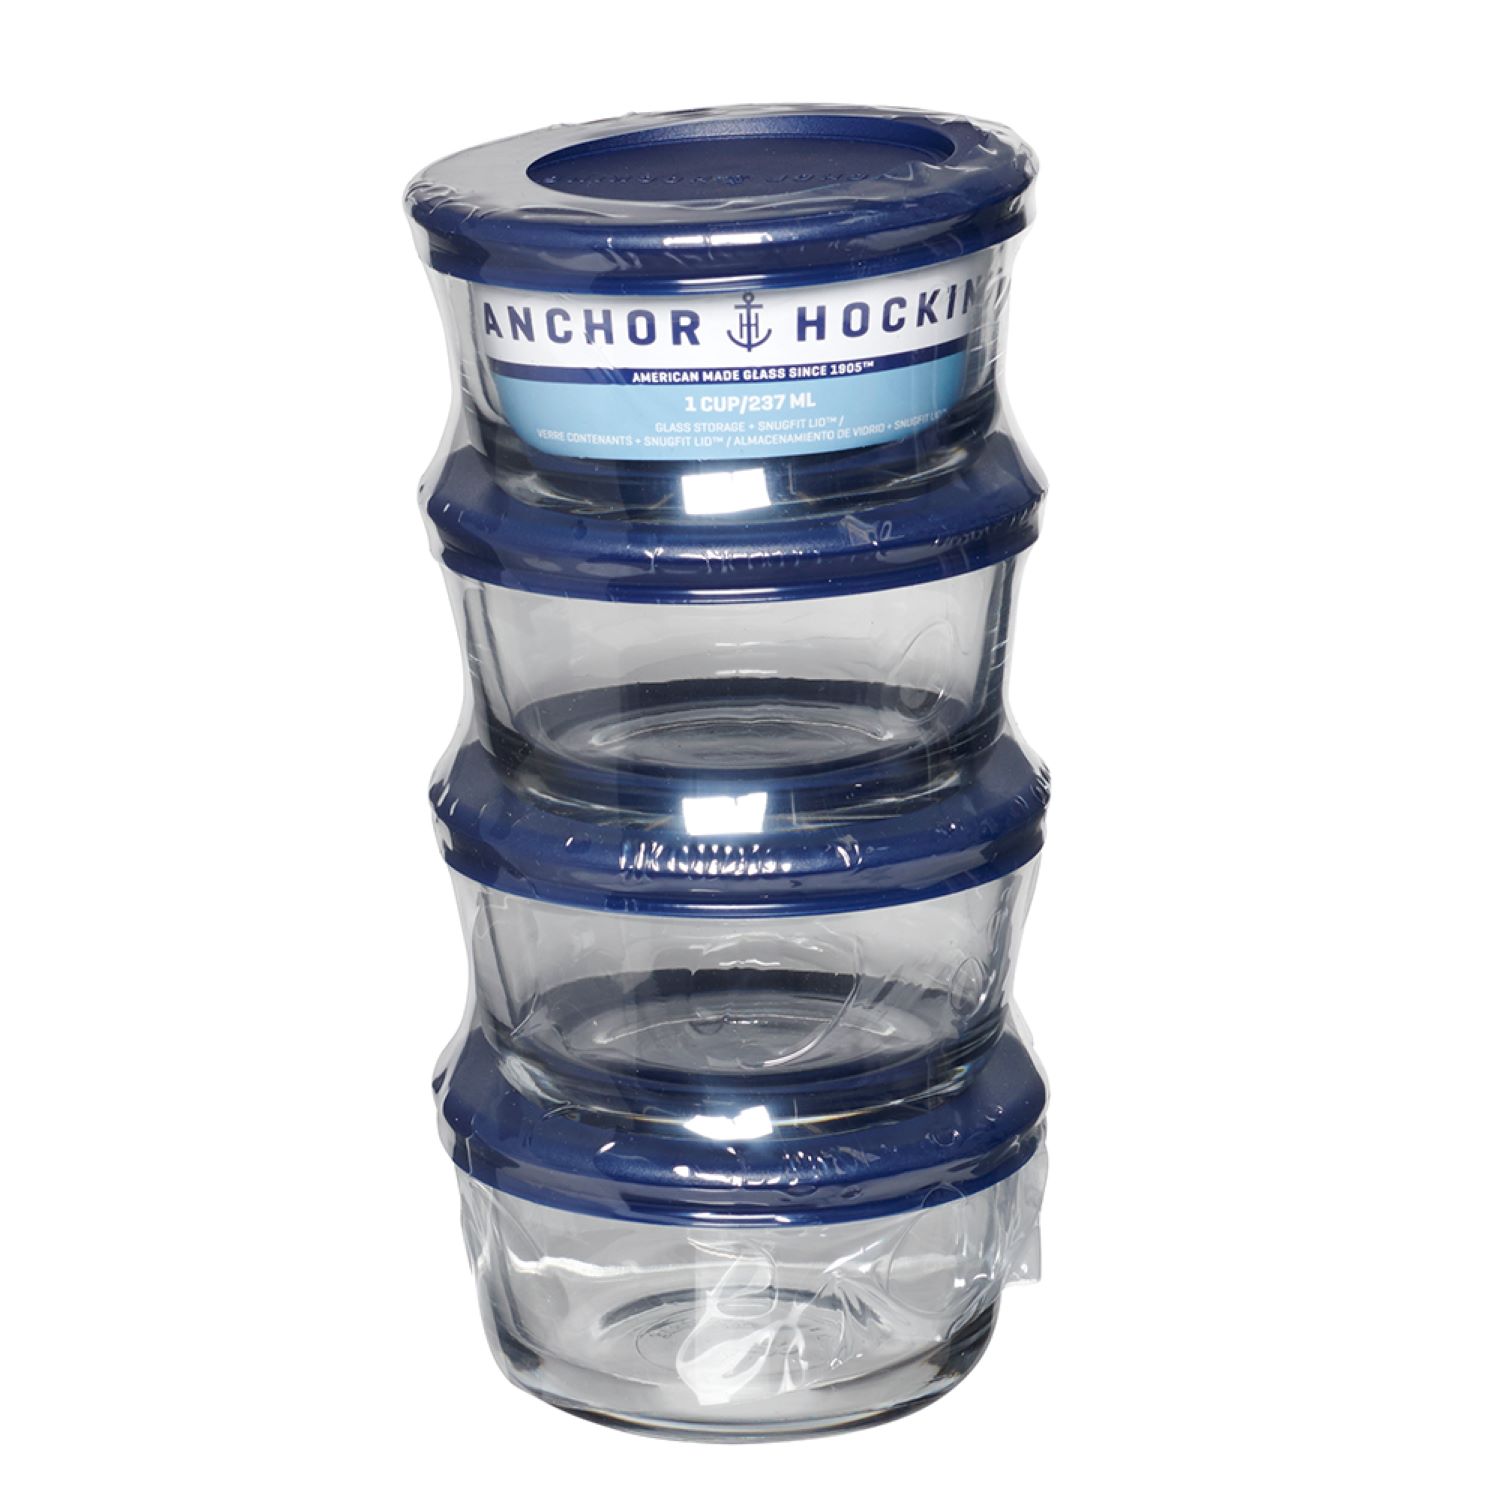 Anchor Hocking Glass Food Storage Containers with Lids, 1 Cup Round, Set of 4 - image 2 of 7